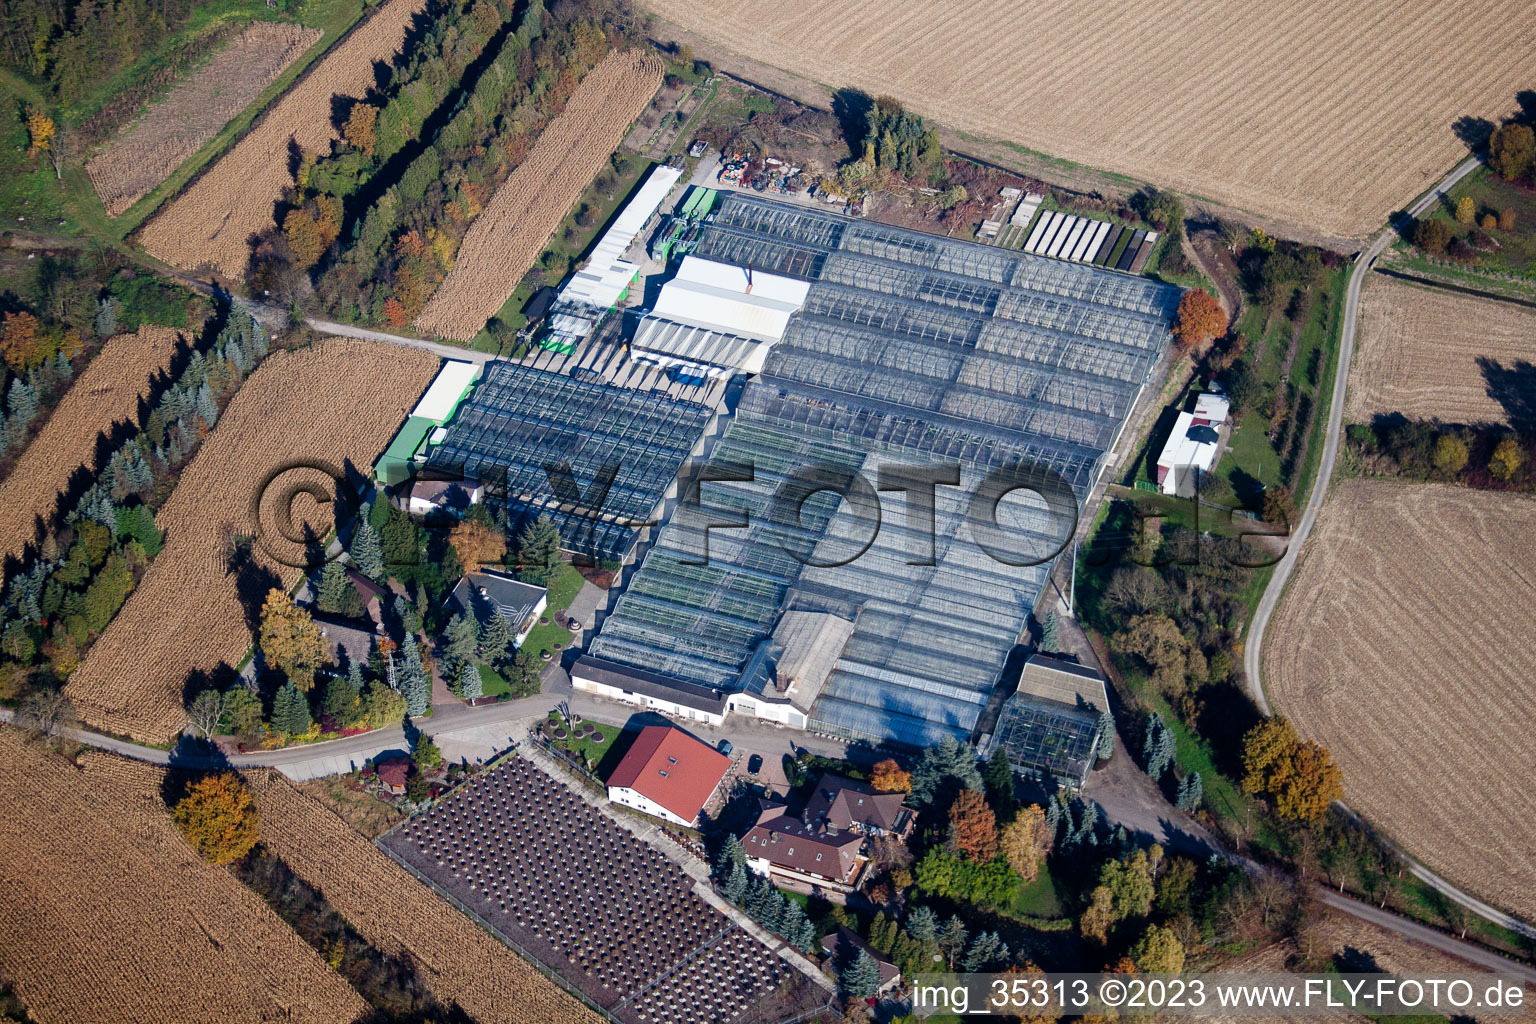 Geranium Endisch GmbH in Hagenbach in the state Rhineland-Palatinate, Germany out of the air